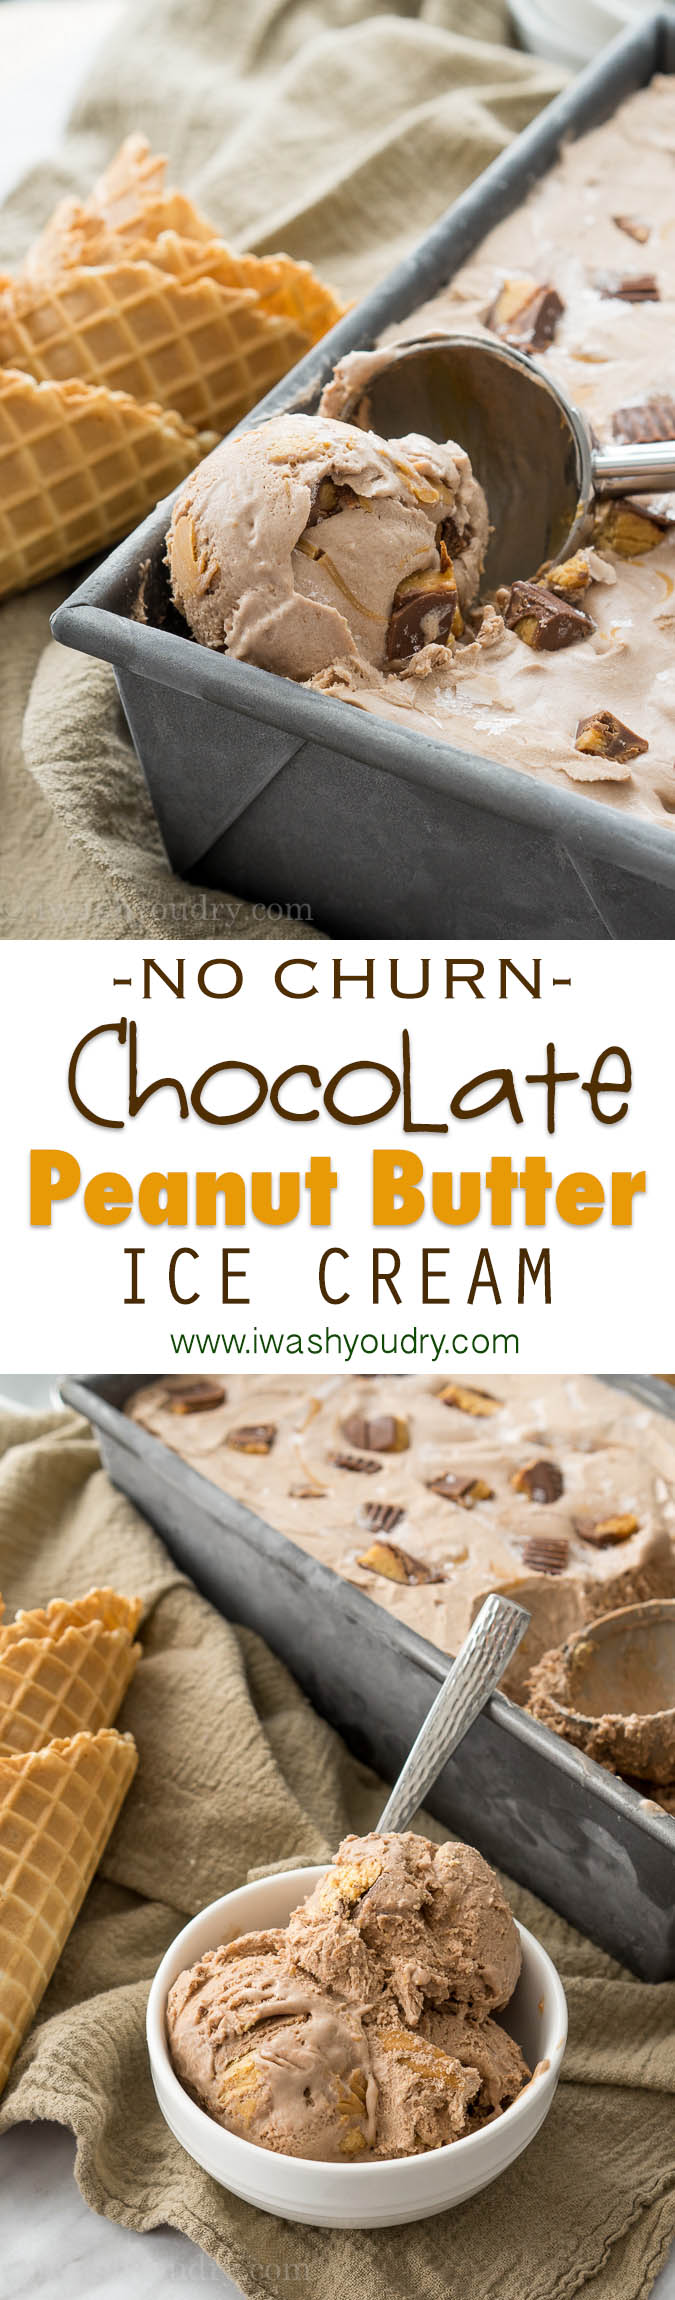 The easiest 5 ingredient, No Churn, Chocolate Peanut Butter Ice Cream! So creamy and delicious!